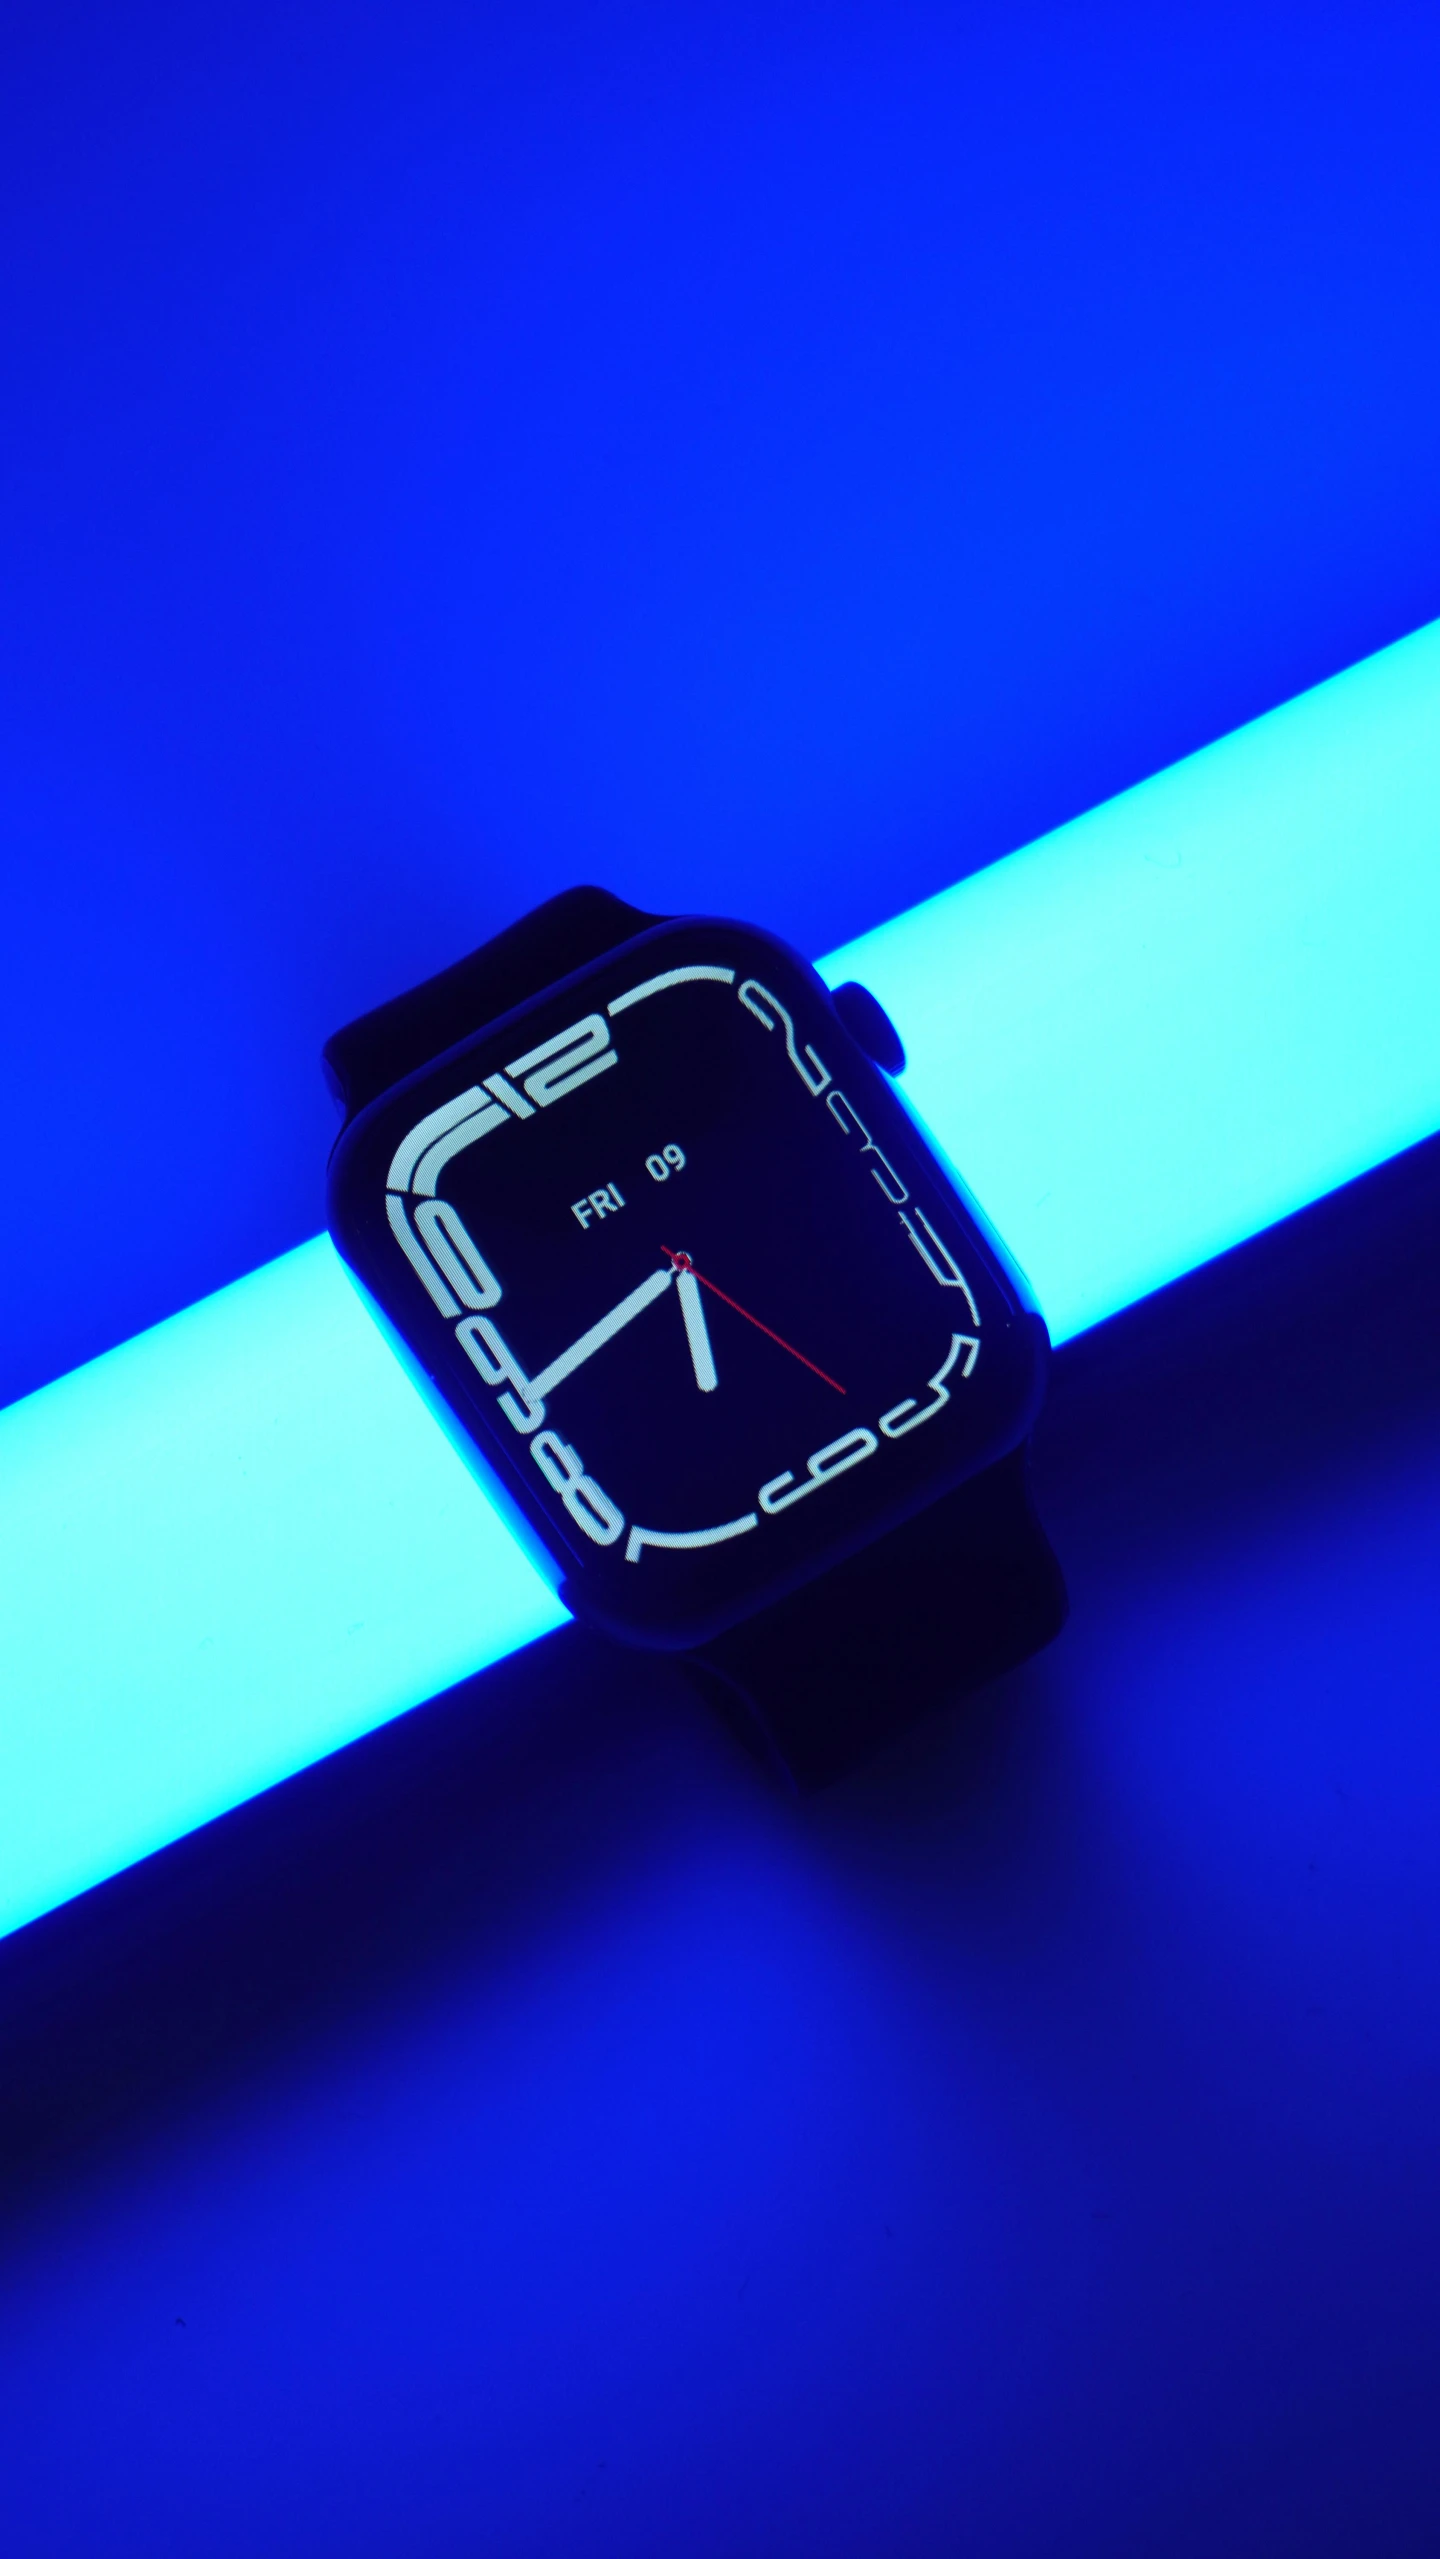 a watch with blue light shining on it